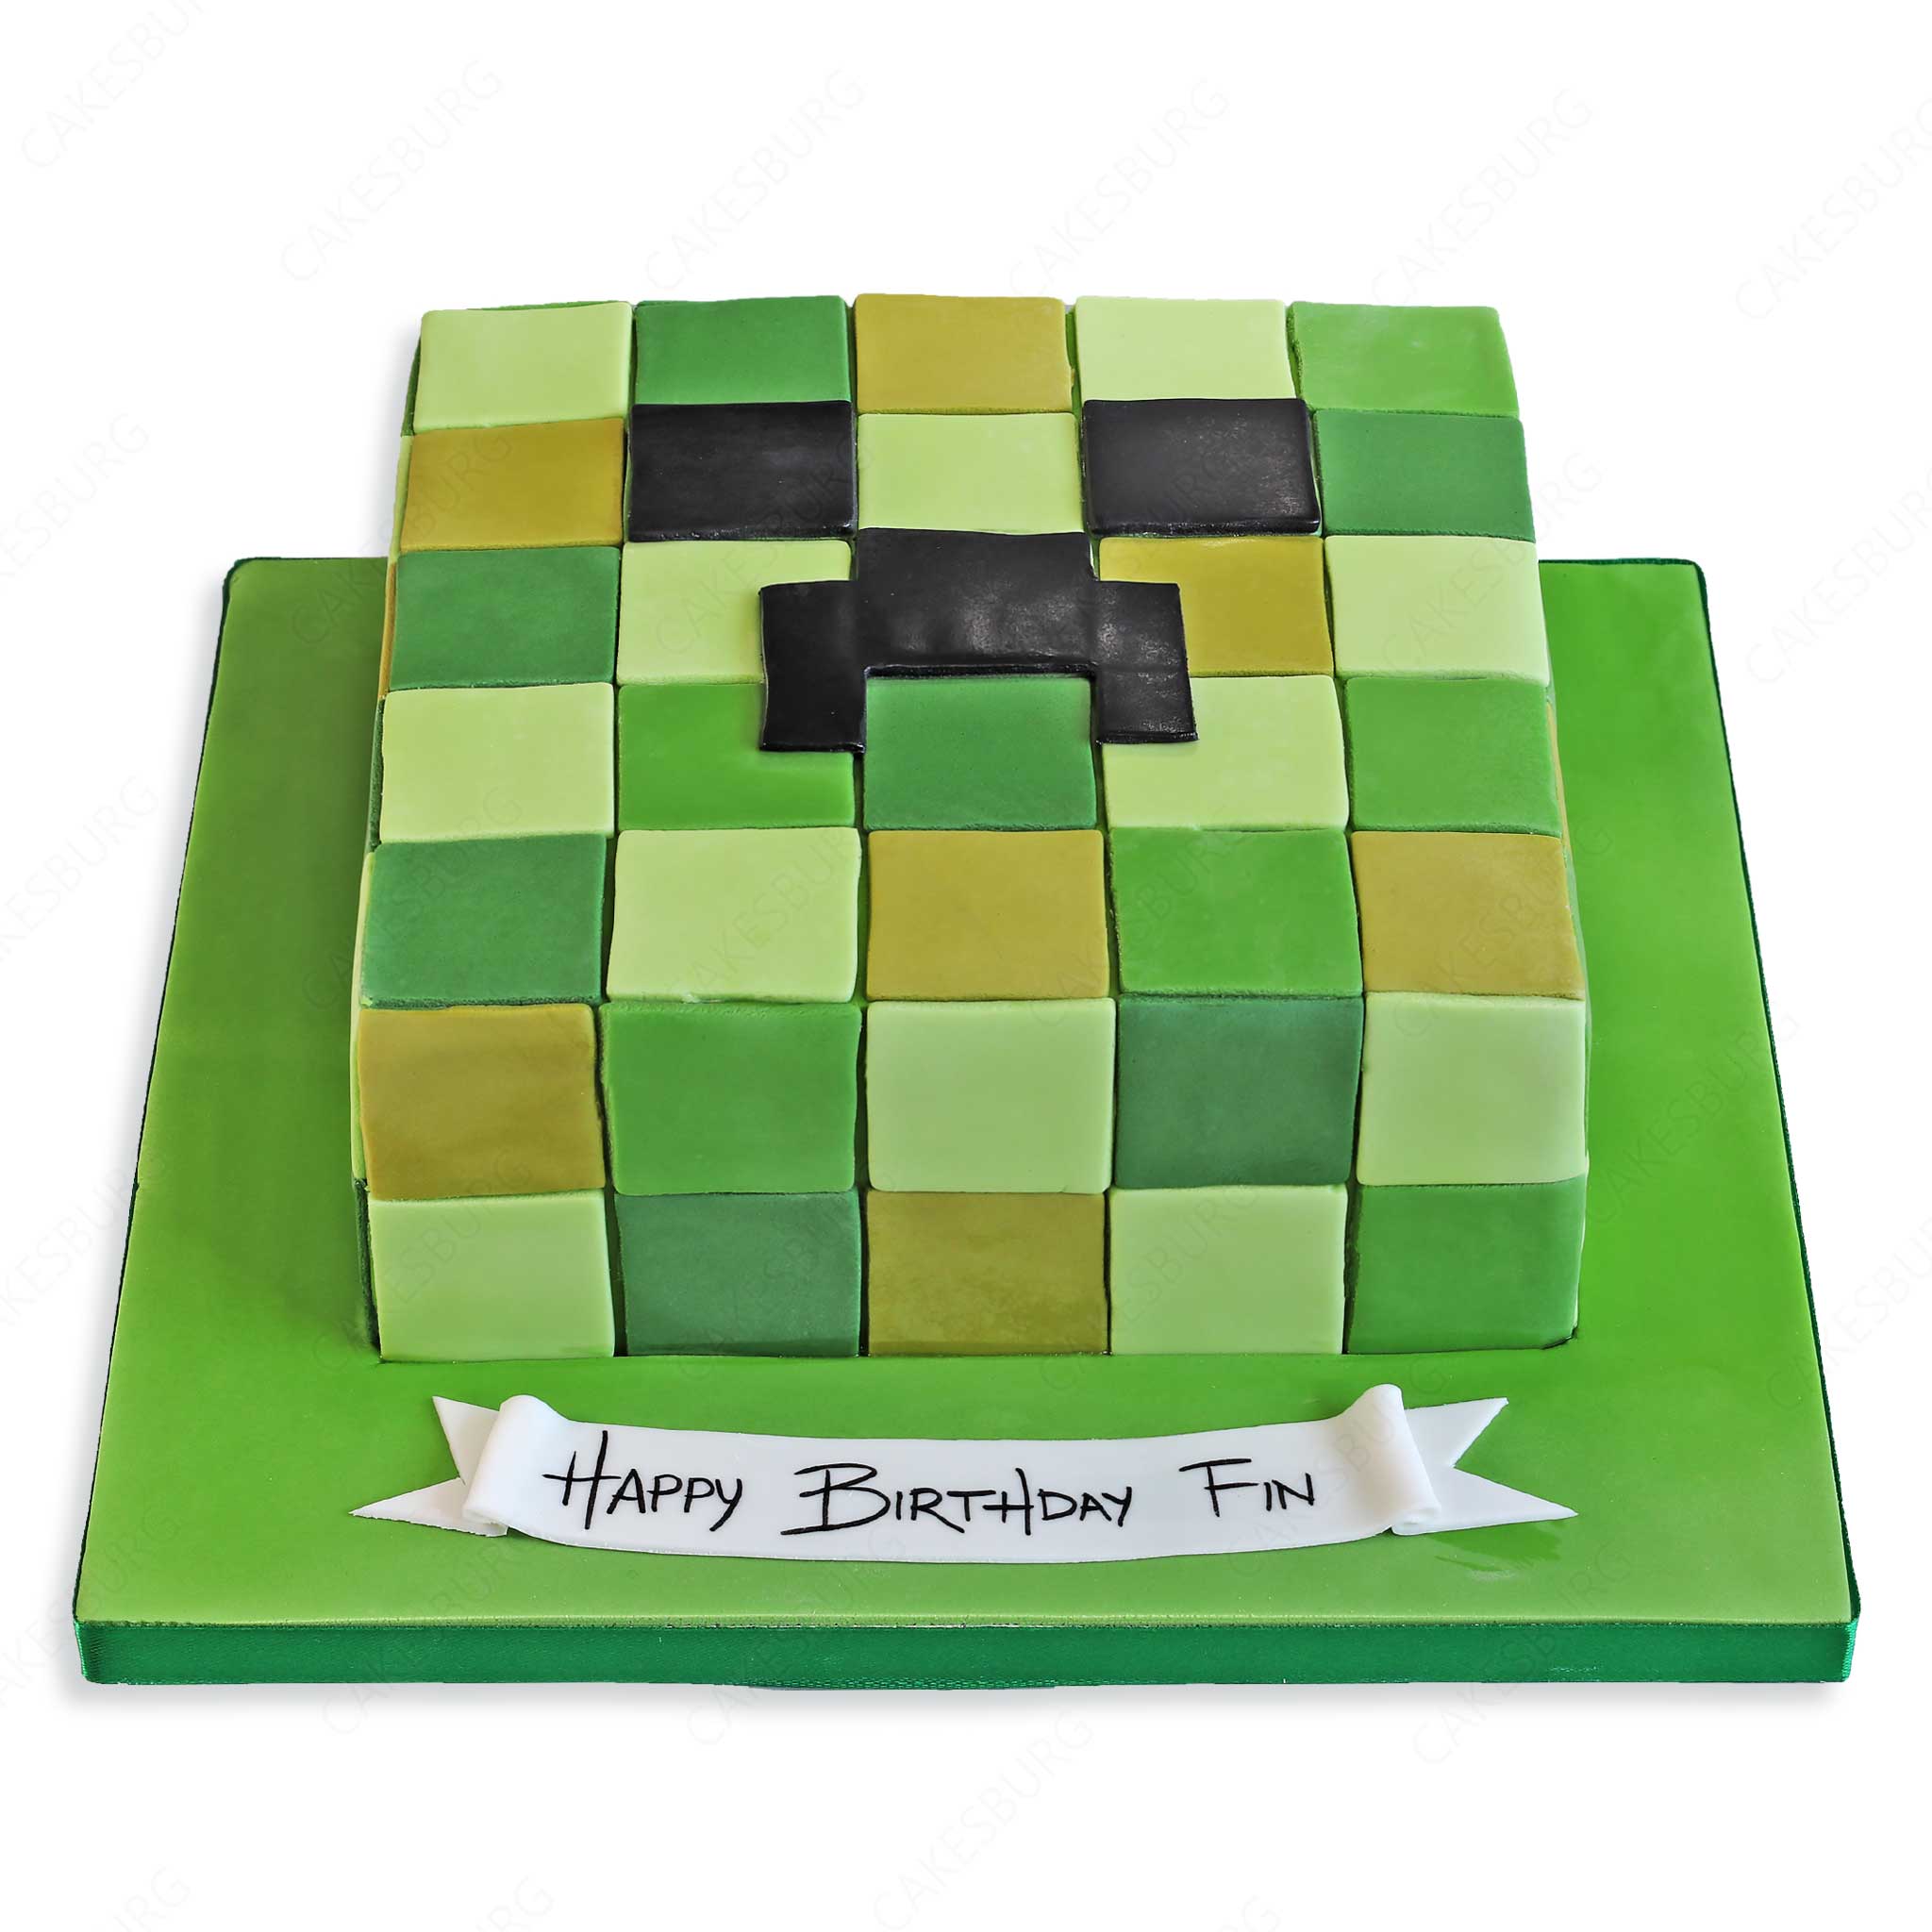 Minecraft Cake Tutorial Including Fondant / Gum Paste Figures of Steve and  Creeper in Action Poses - YouTube